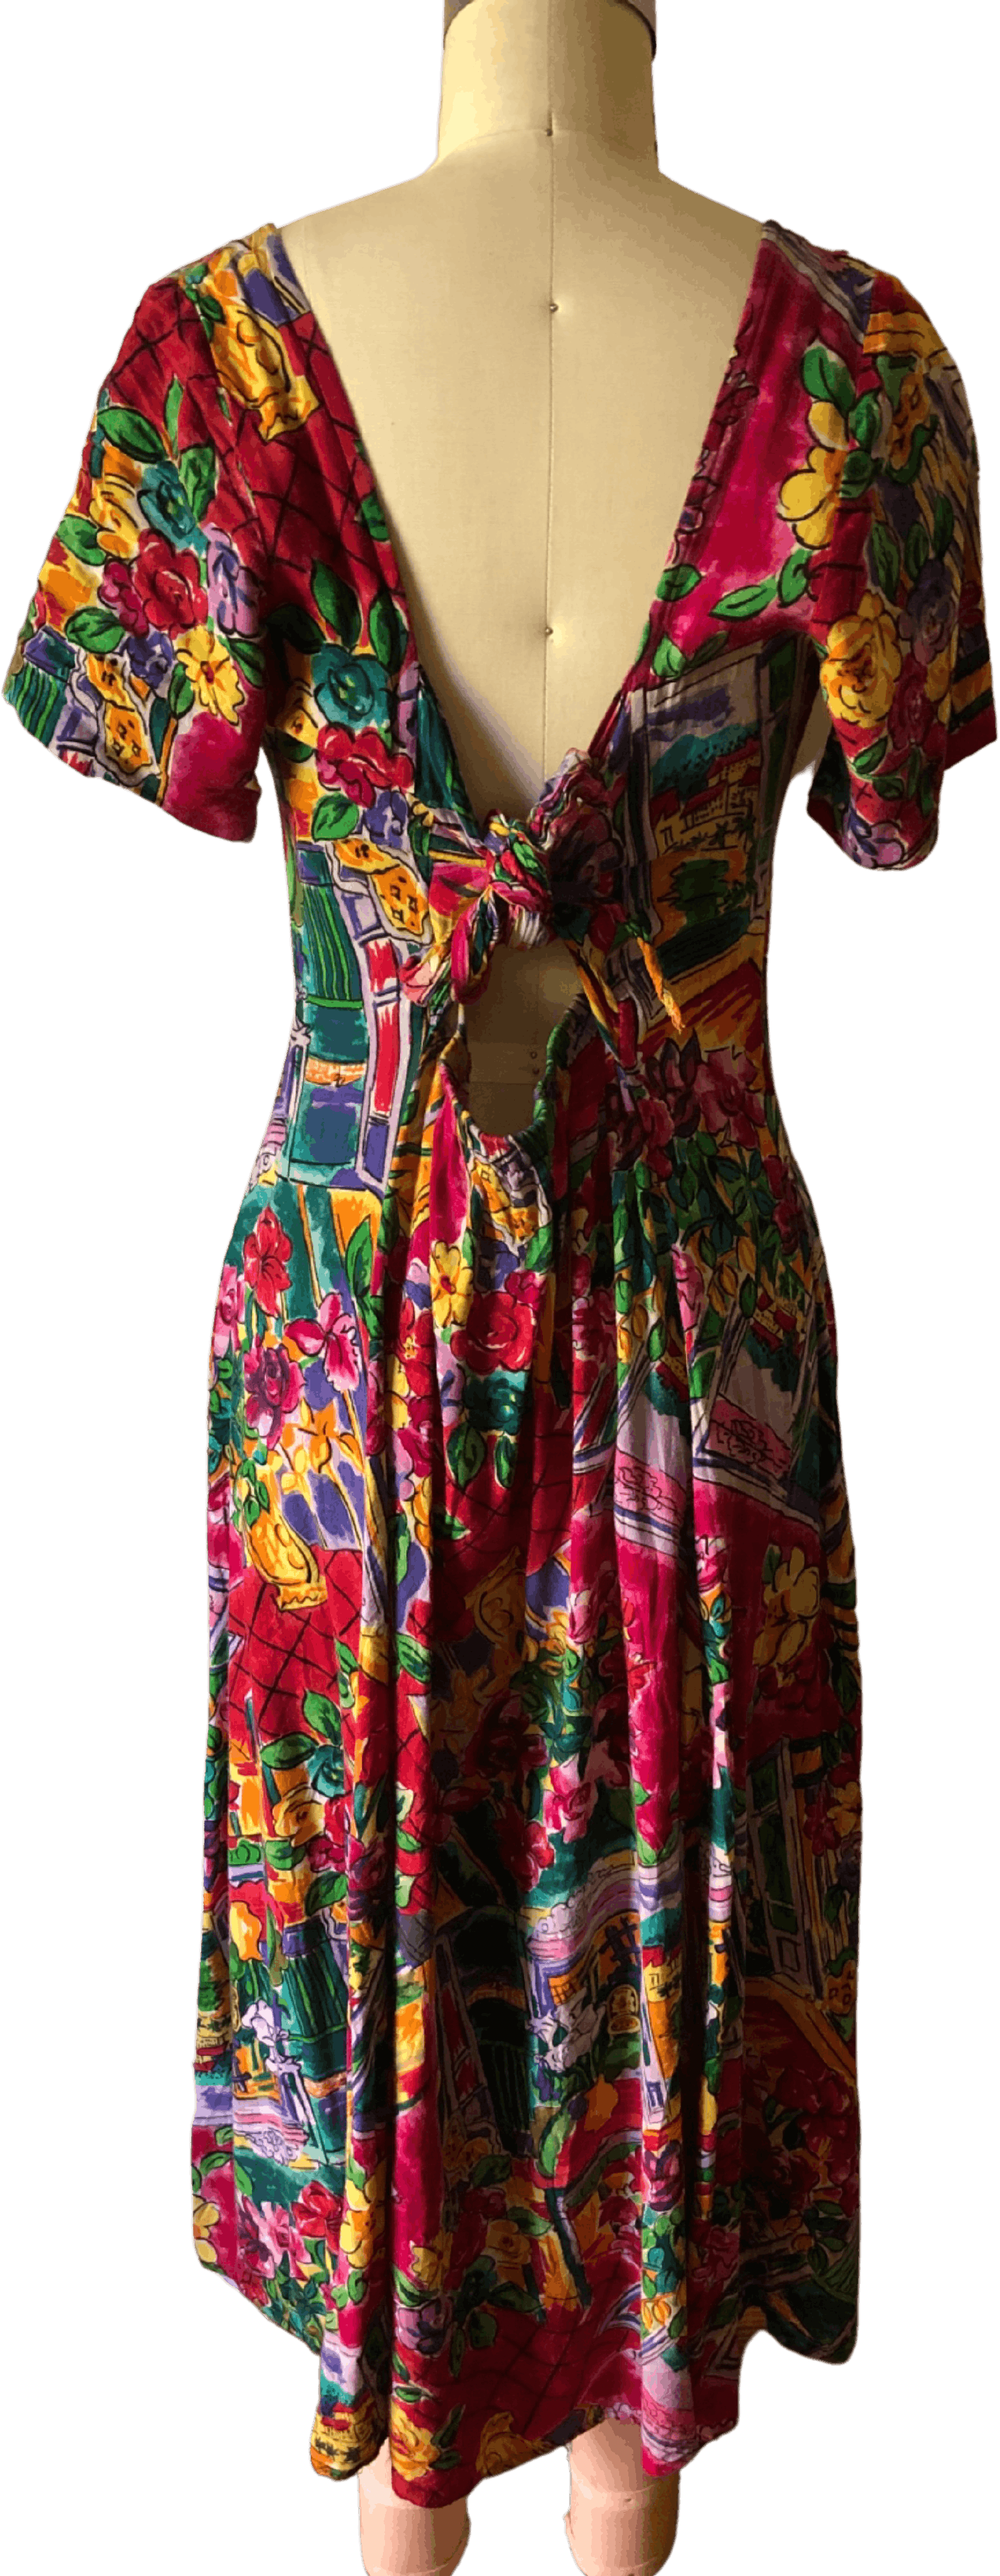 90's Gauzy Watercolor Floral Backless Dress by Vintage | Shop THRILLING